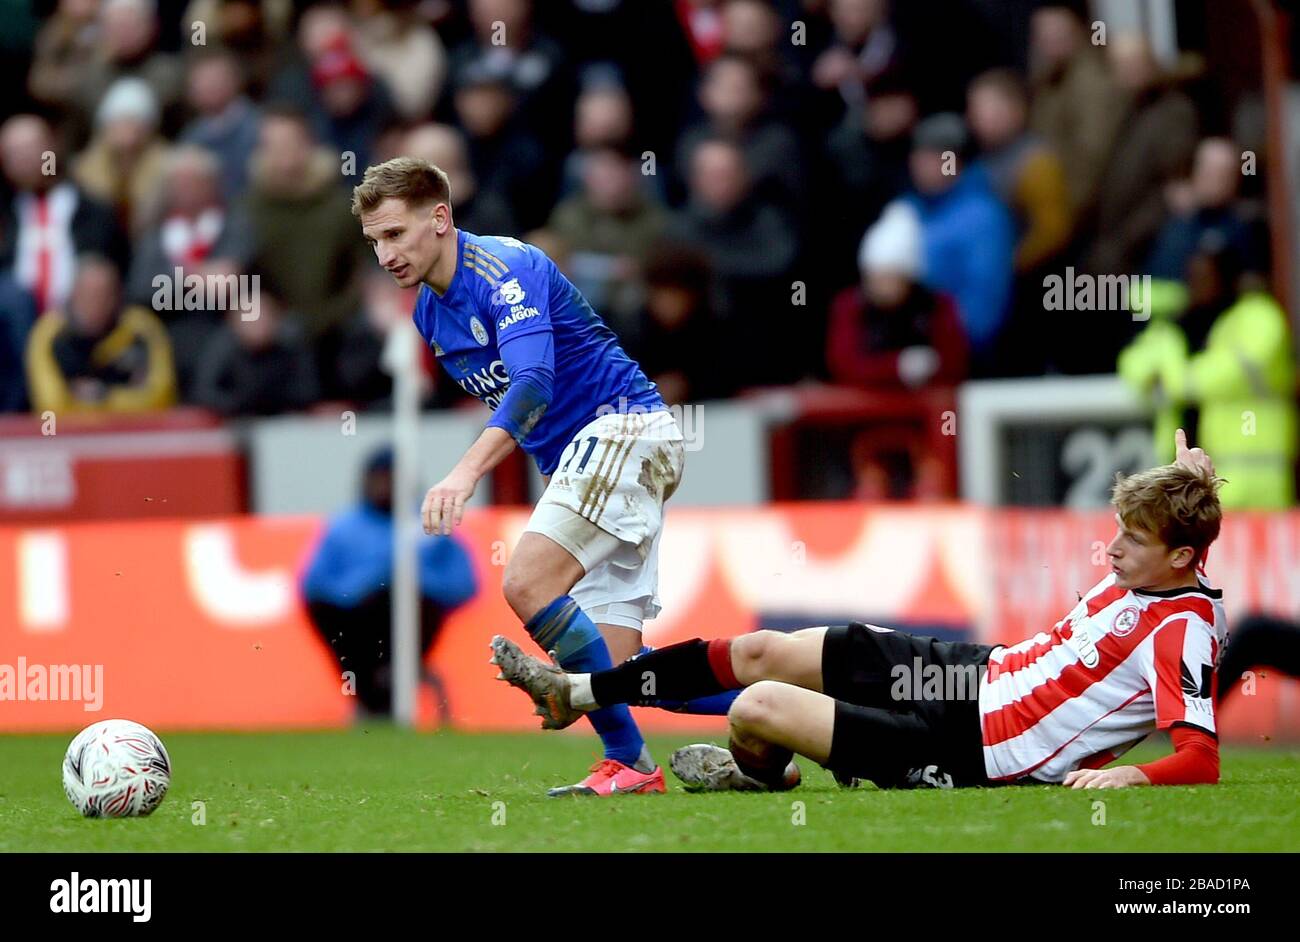 Leicester City's Marc Albrighton (left) and Brentford's Mads Roerslev Rasmussen battle for the ball Stock Photo